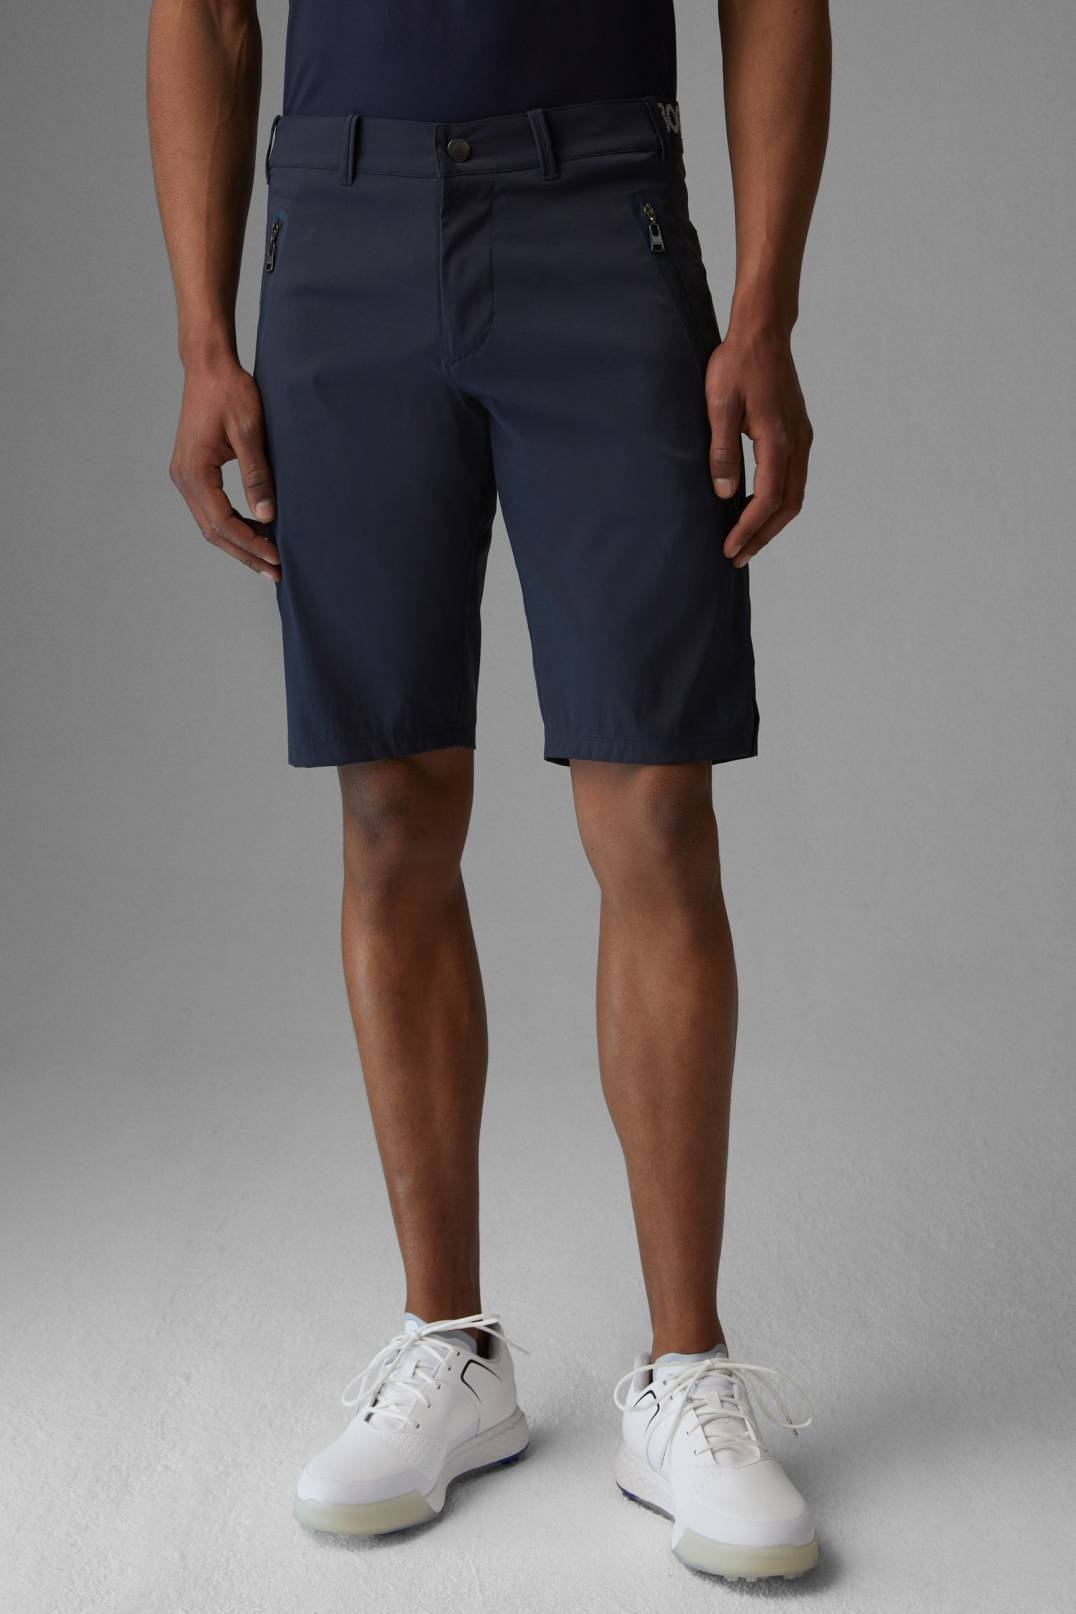 COLVIN FUNCTIONAL SHORTS IN NAVY BLUE - 2